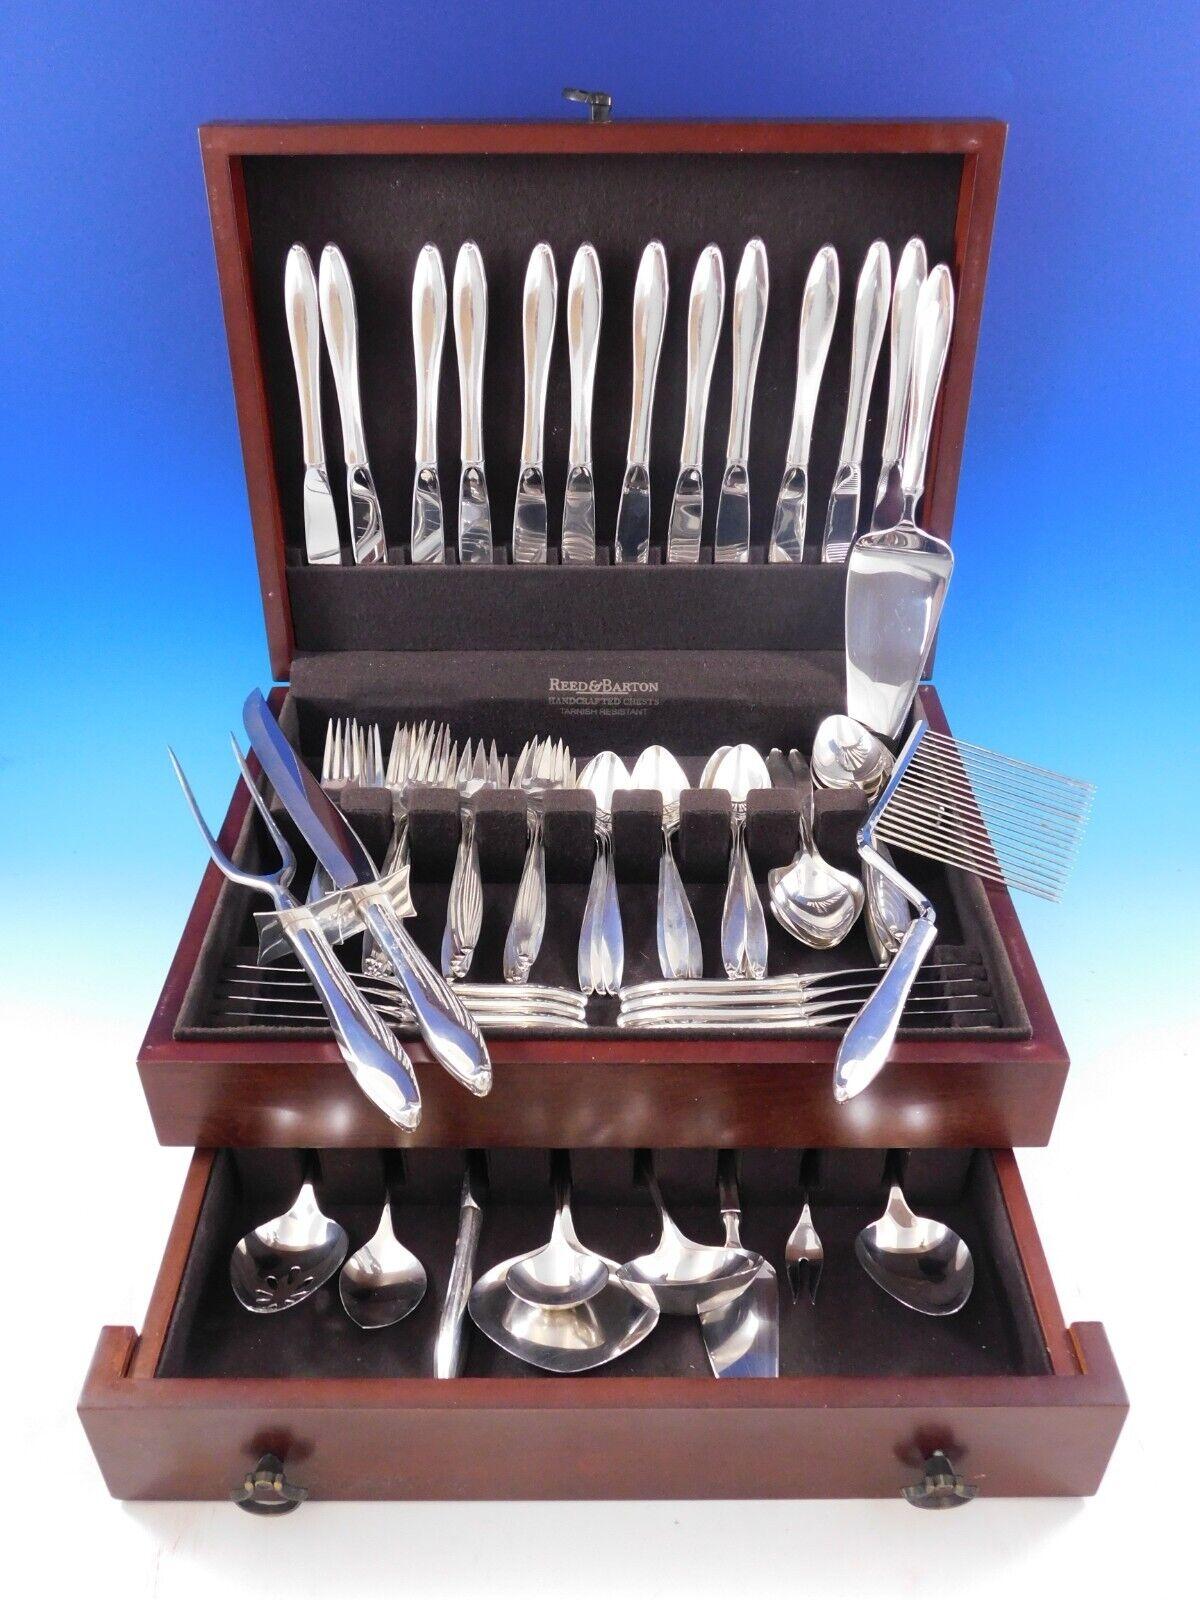 Mid-Century Modern Vespera by Towle sterling silver Flatware set, 86 pieces. This set includes:

12 knives, 9